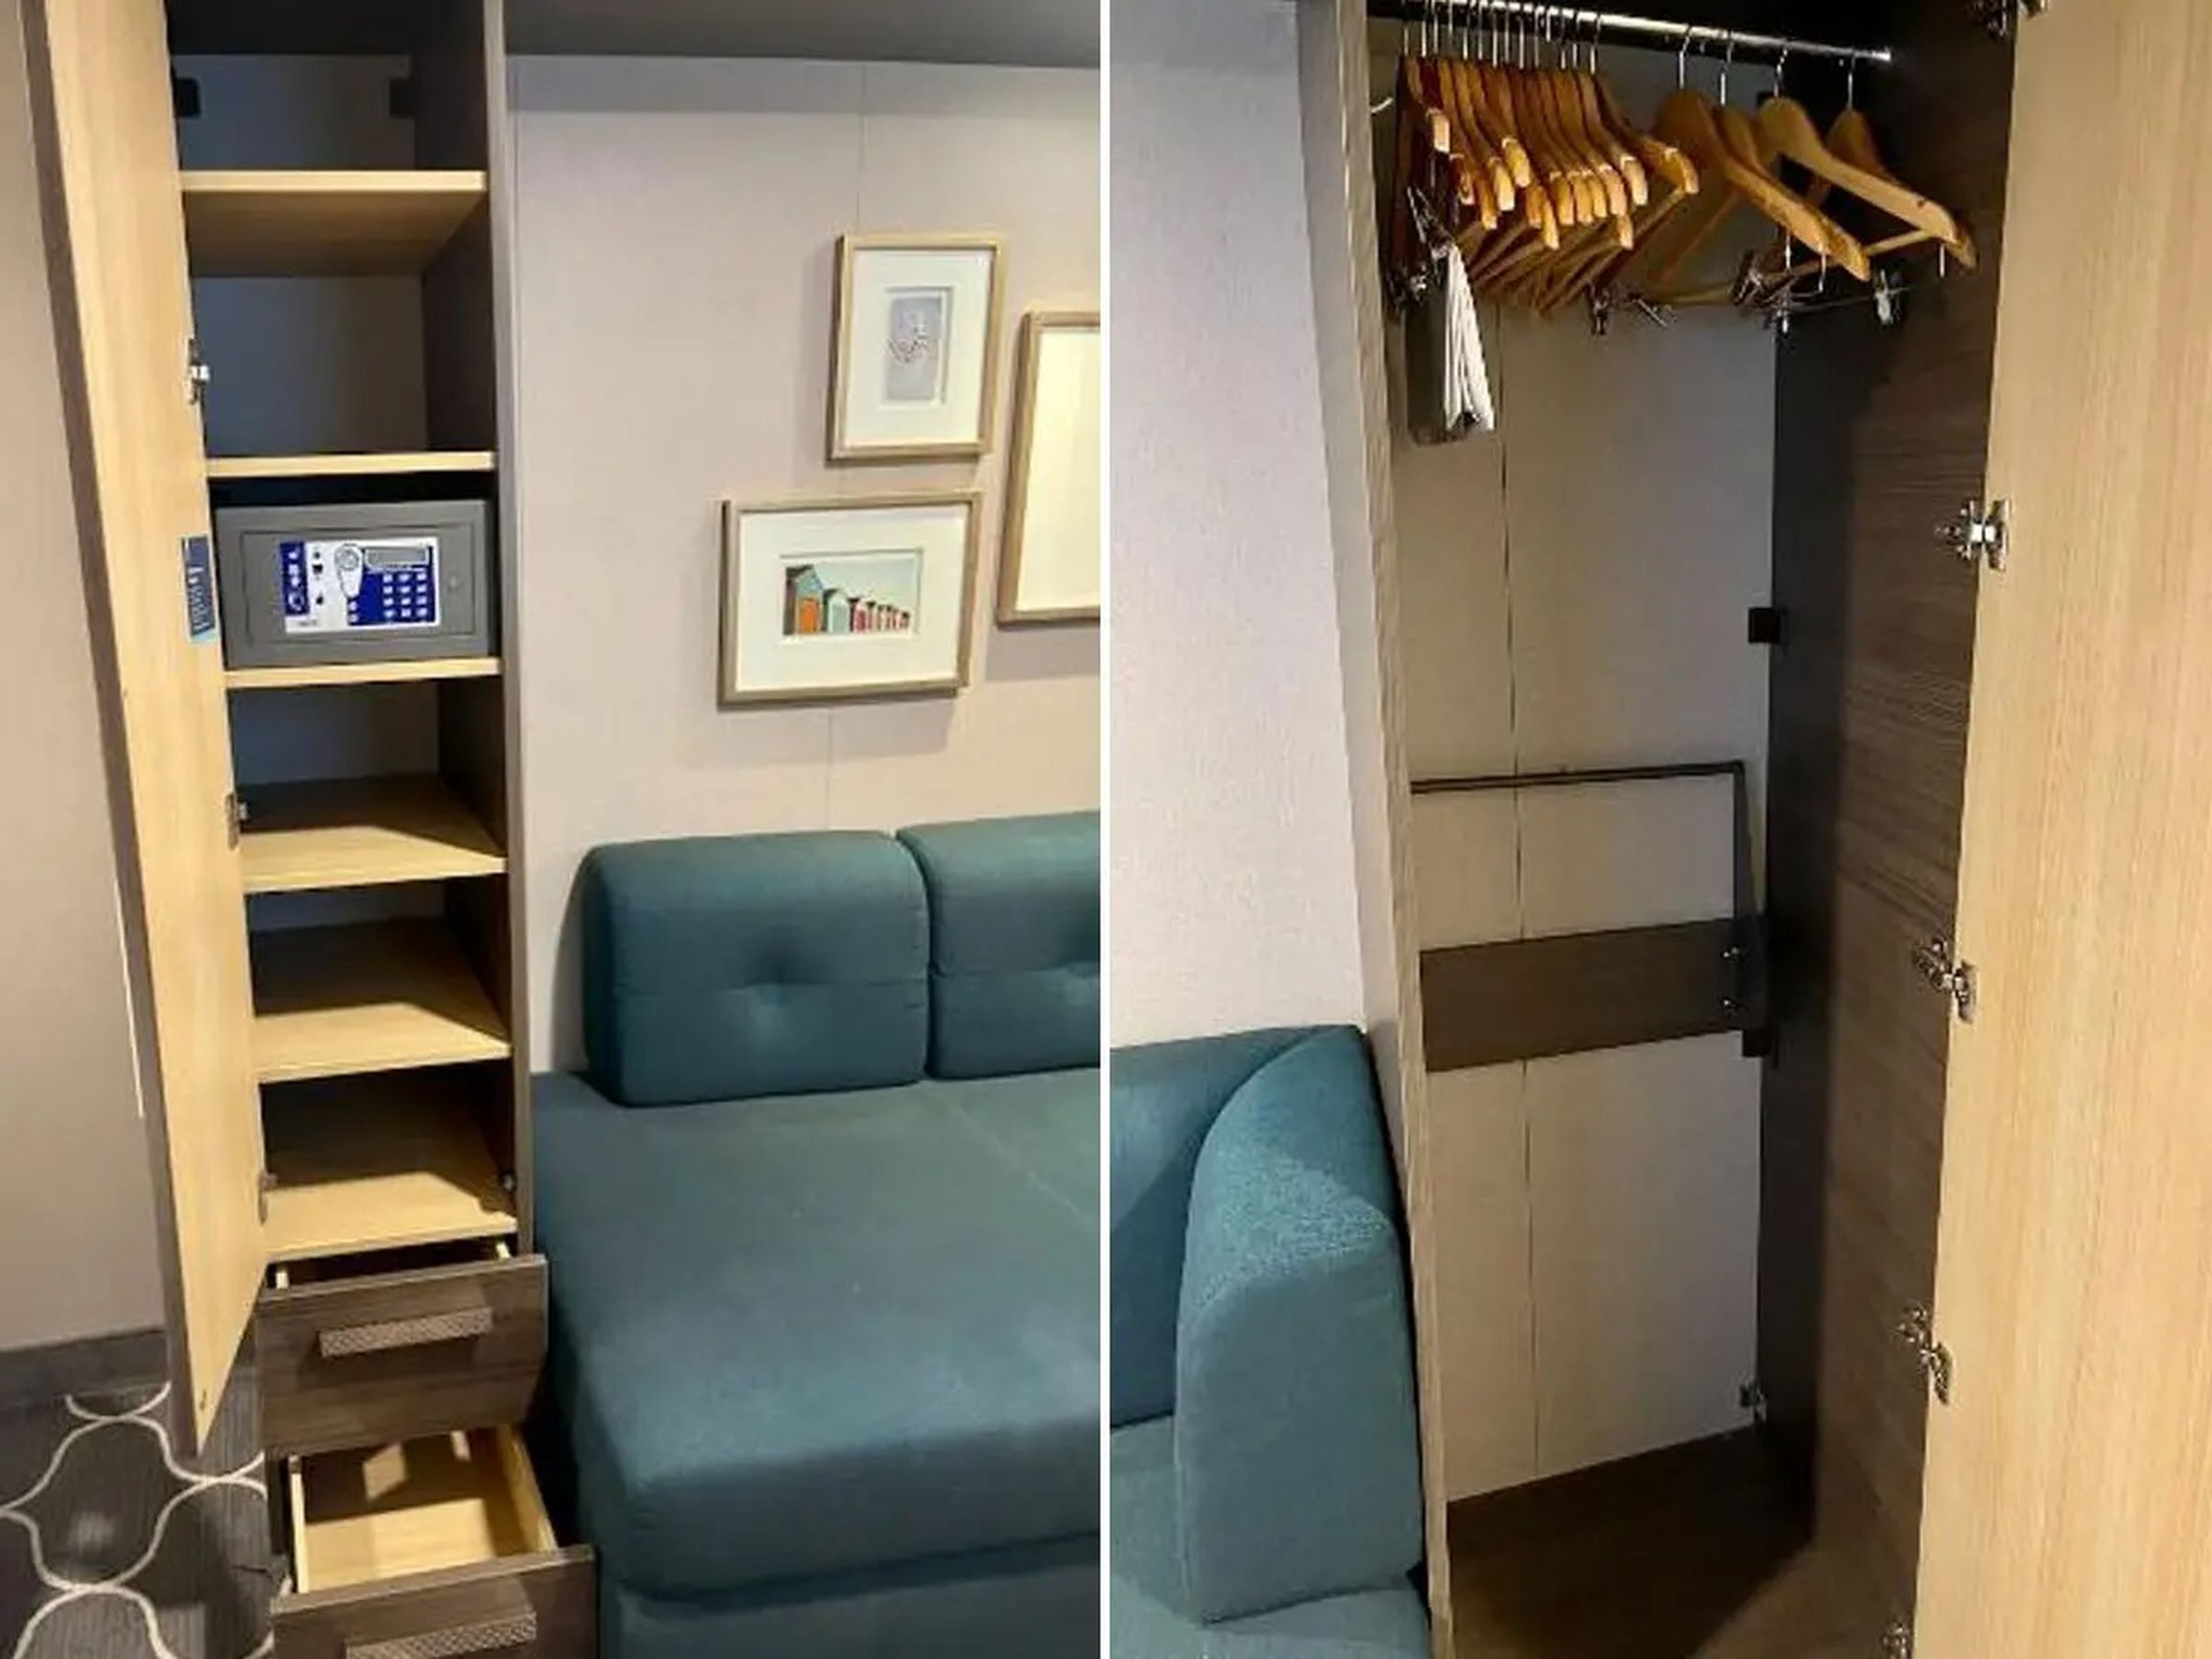 cut out drawers and closet with hangers at symphony of the seas (interior room)